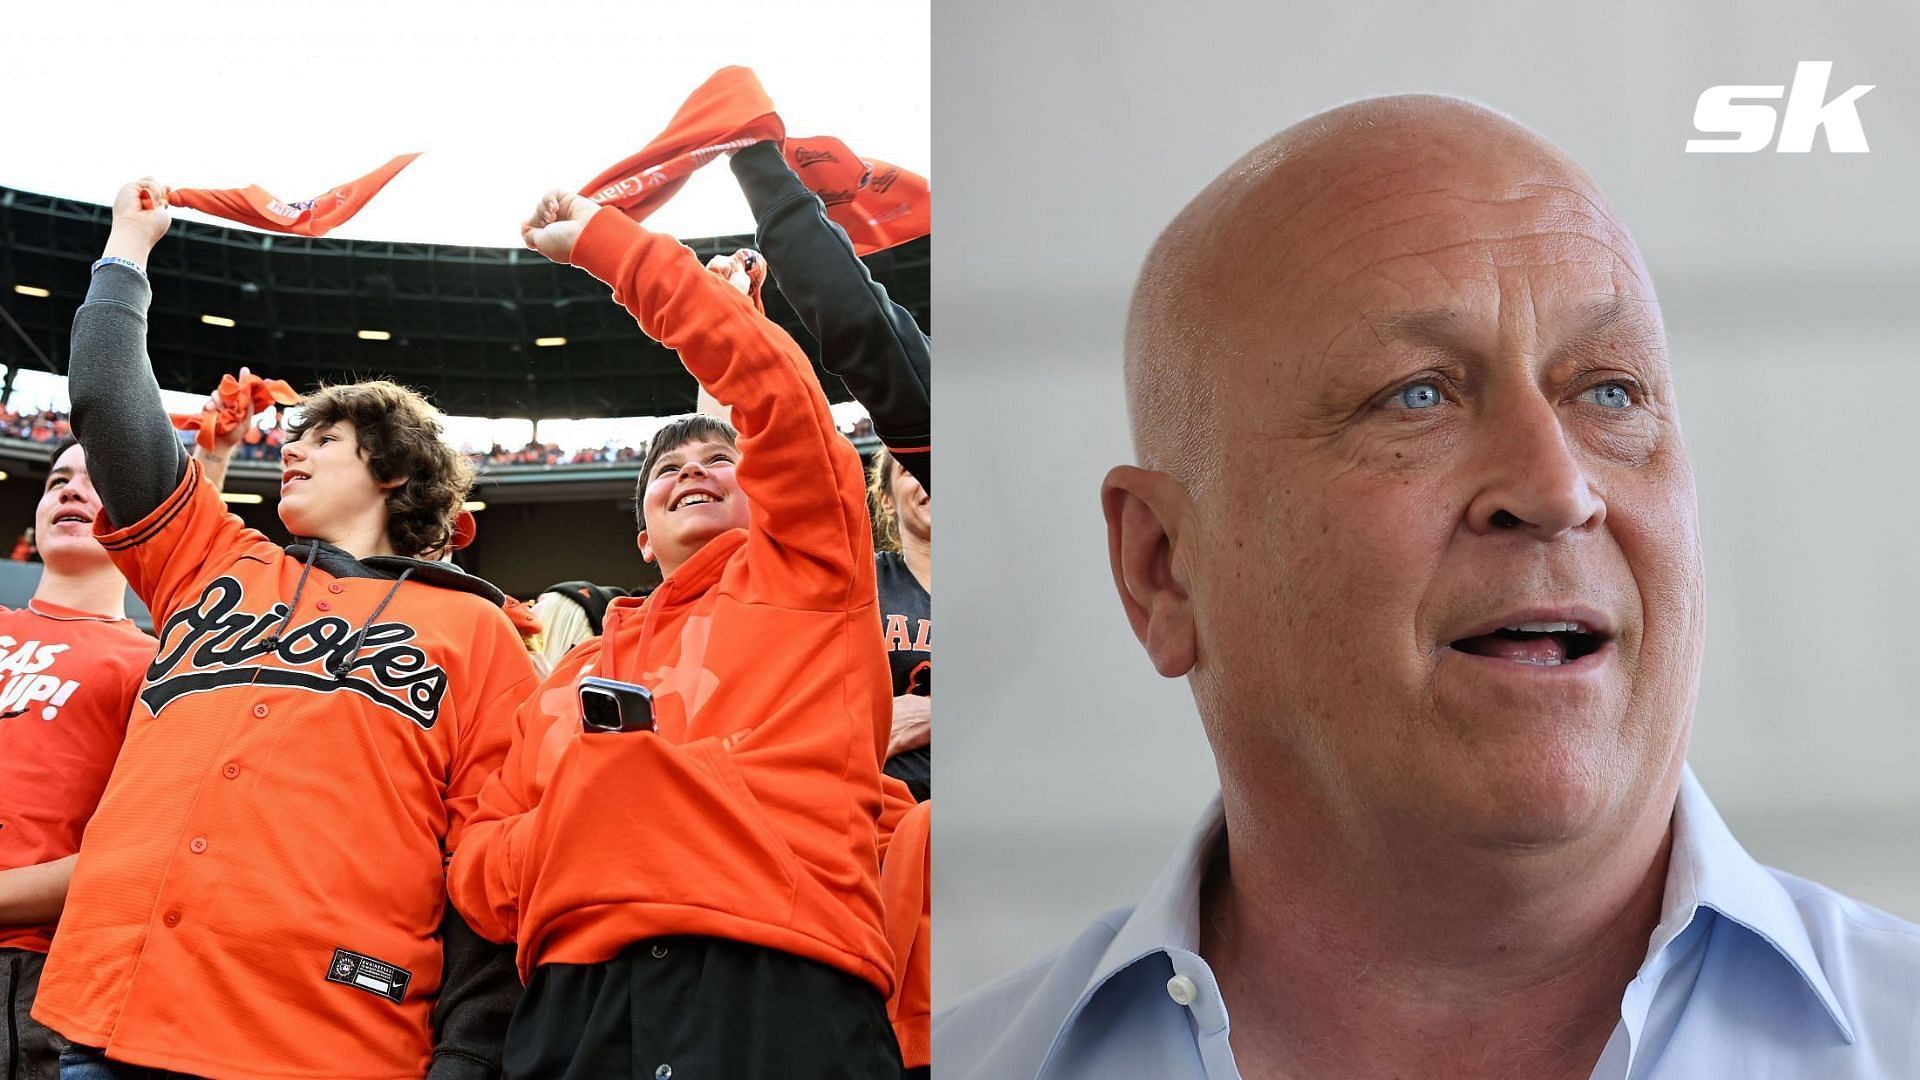 Cal Ripken Jr. says he is honored to join the Baltimore Orioles new ownership group